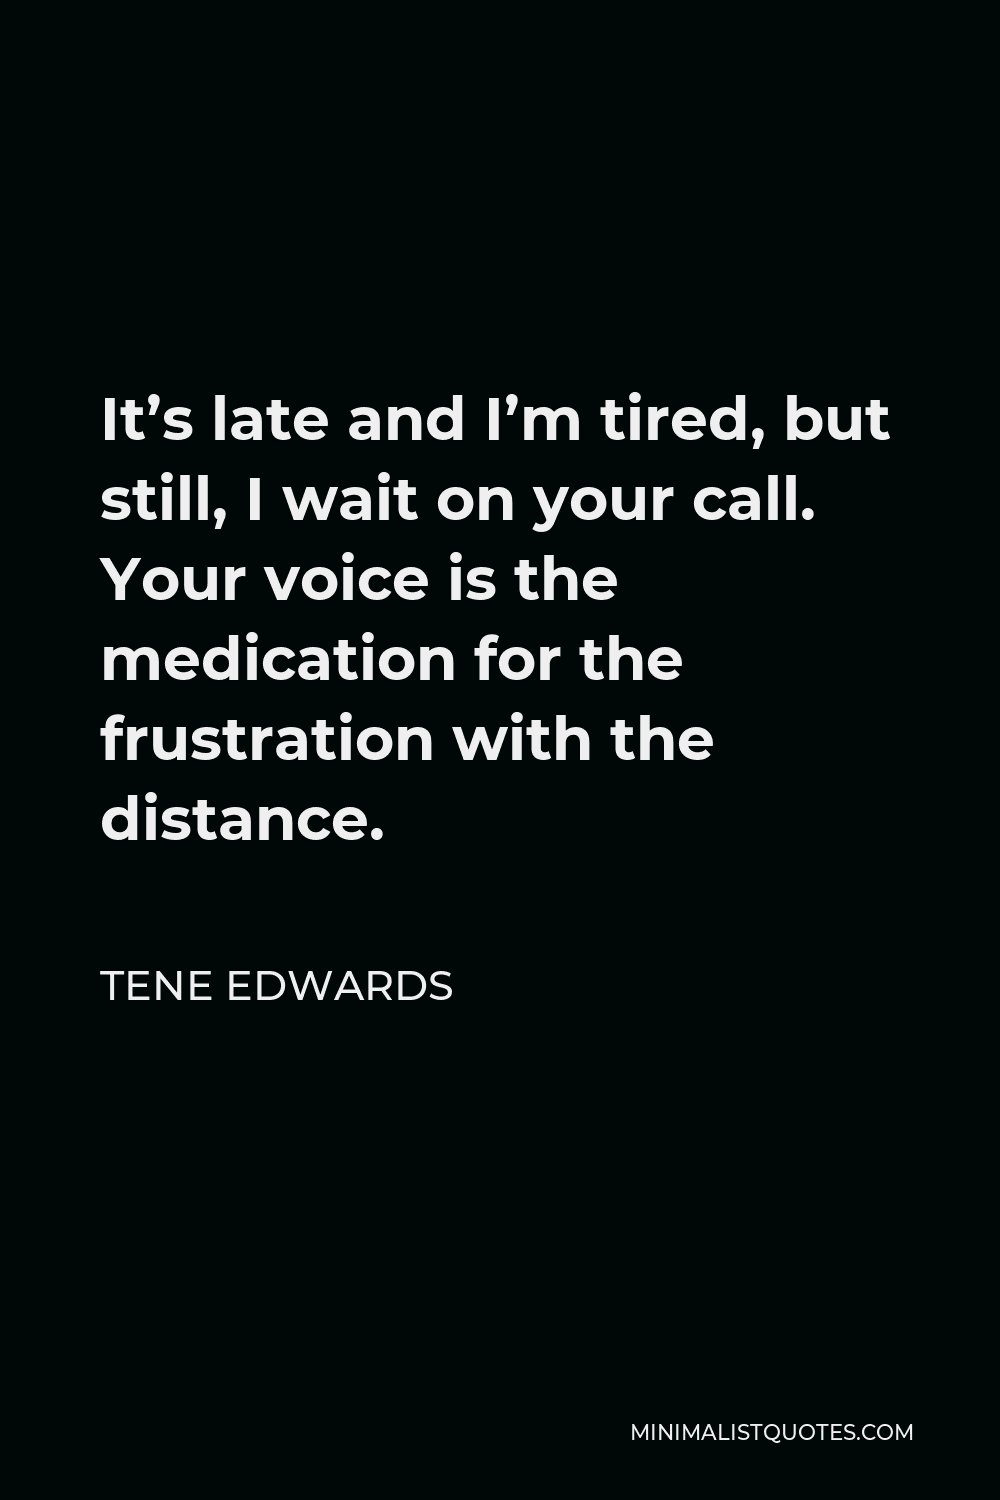 Tene Edwards Quote - It’s late and I’m tired, but still, I wait on your call. Your voice is the medication for the frustration with the distance.